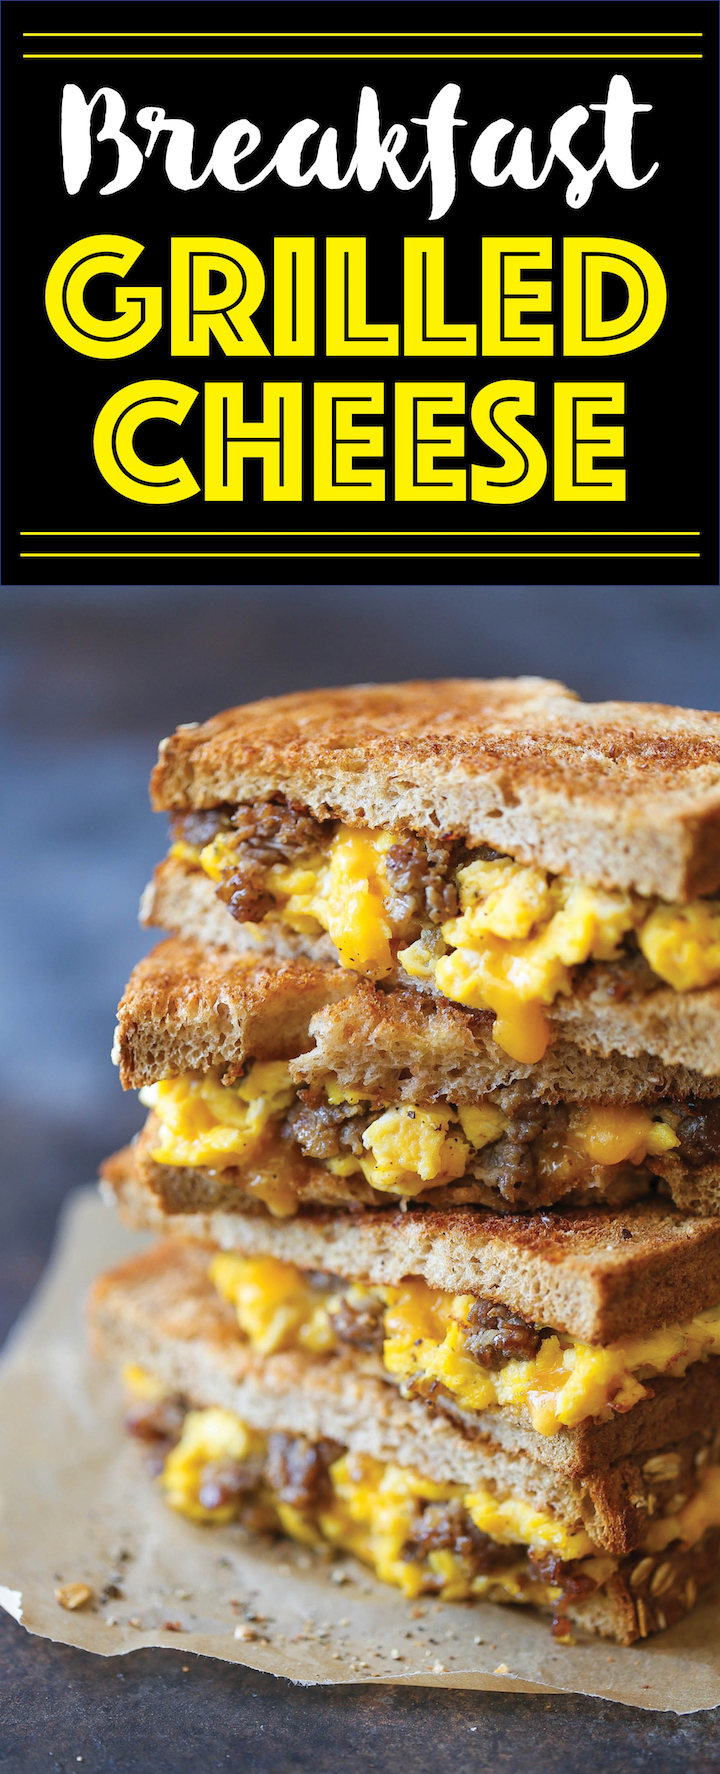 https://s23209.pcdn.co/wp-content/uploads/2016/06/Breakfast-Grilled-Cheese.jpg